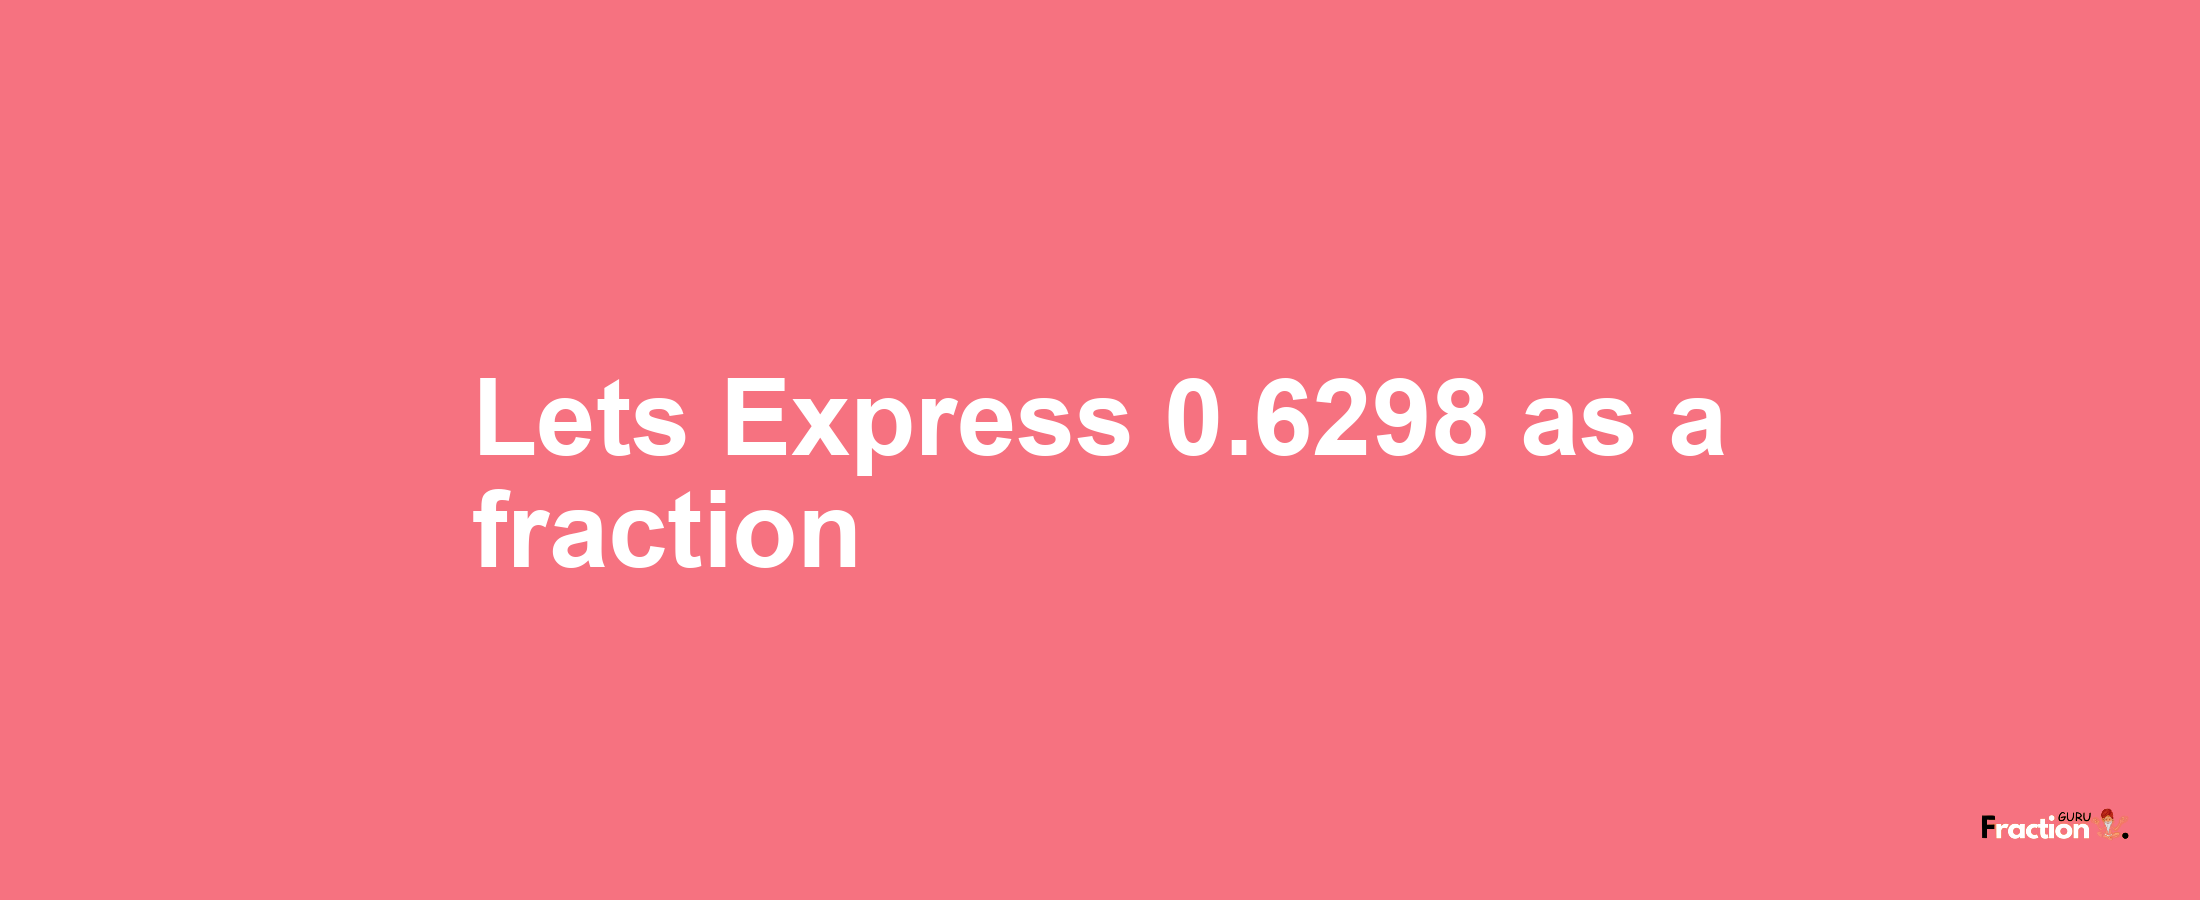 Lets Express 0.6298 as afraction